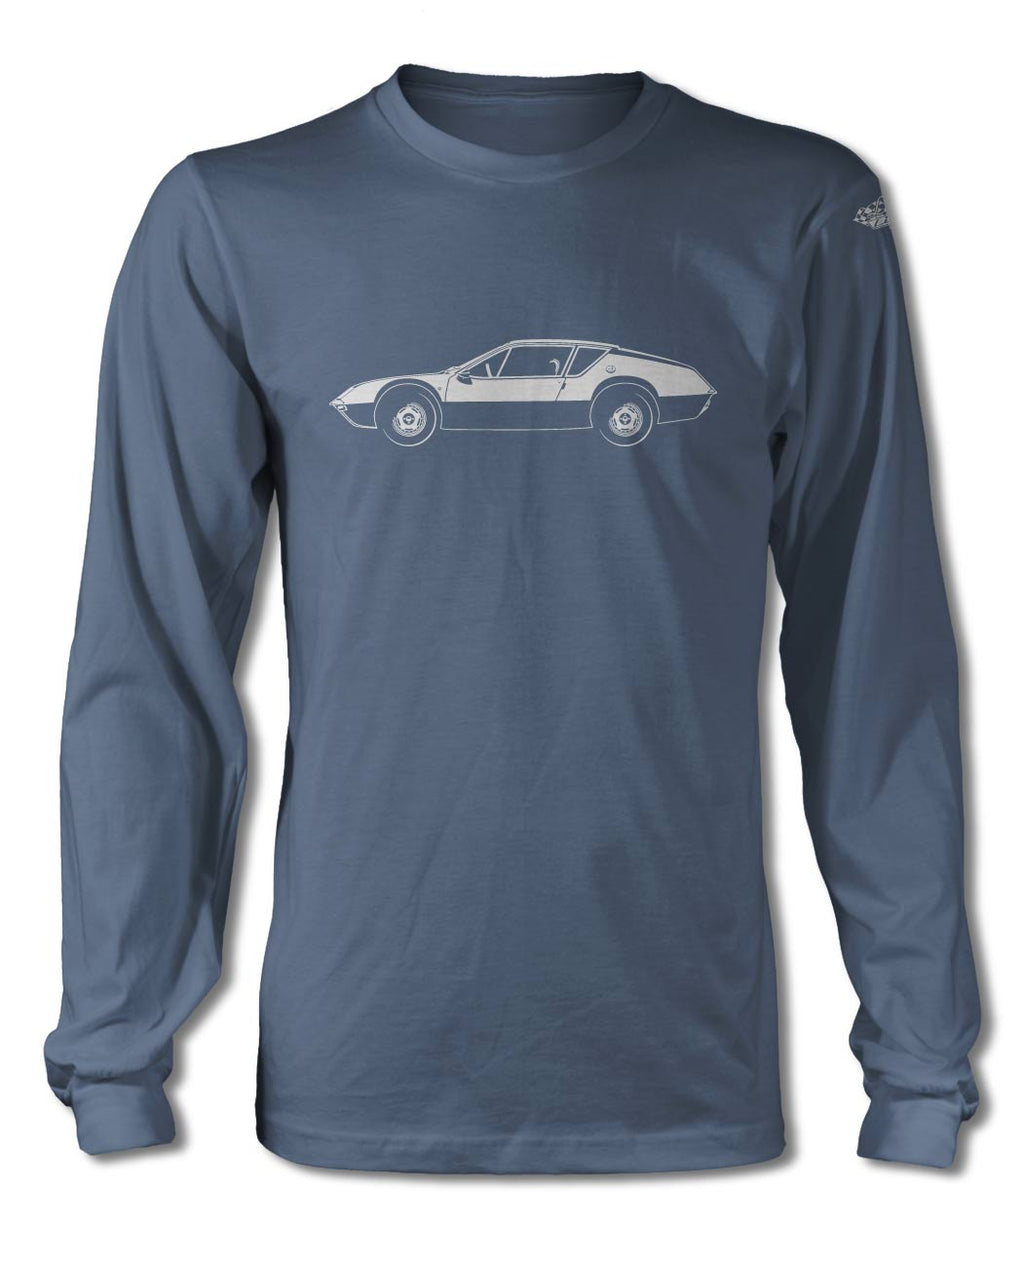 Alpine Renault A310 T-Shirt - Long Sleeves - Side View